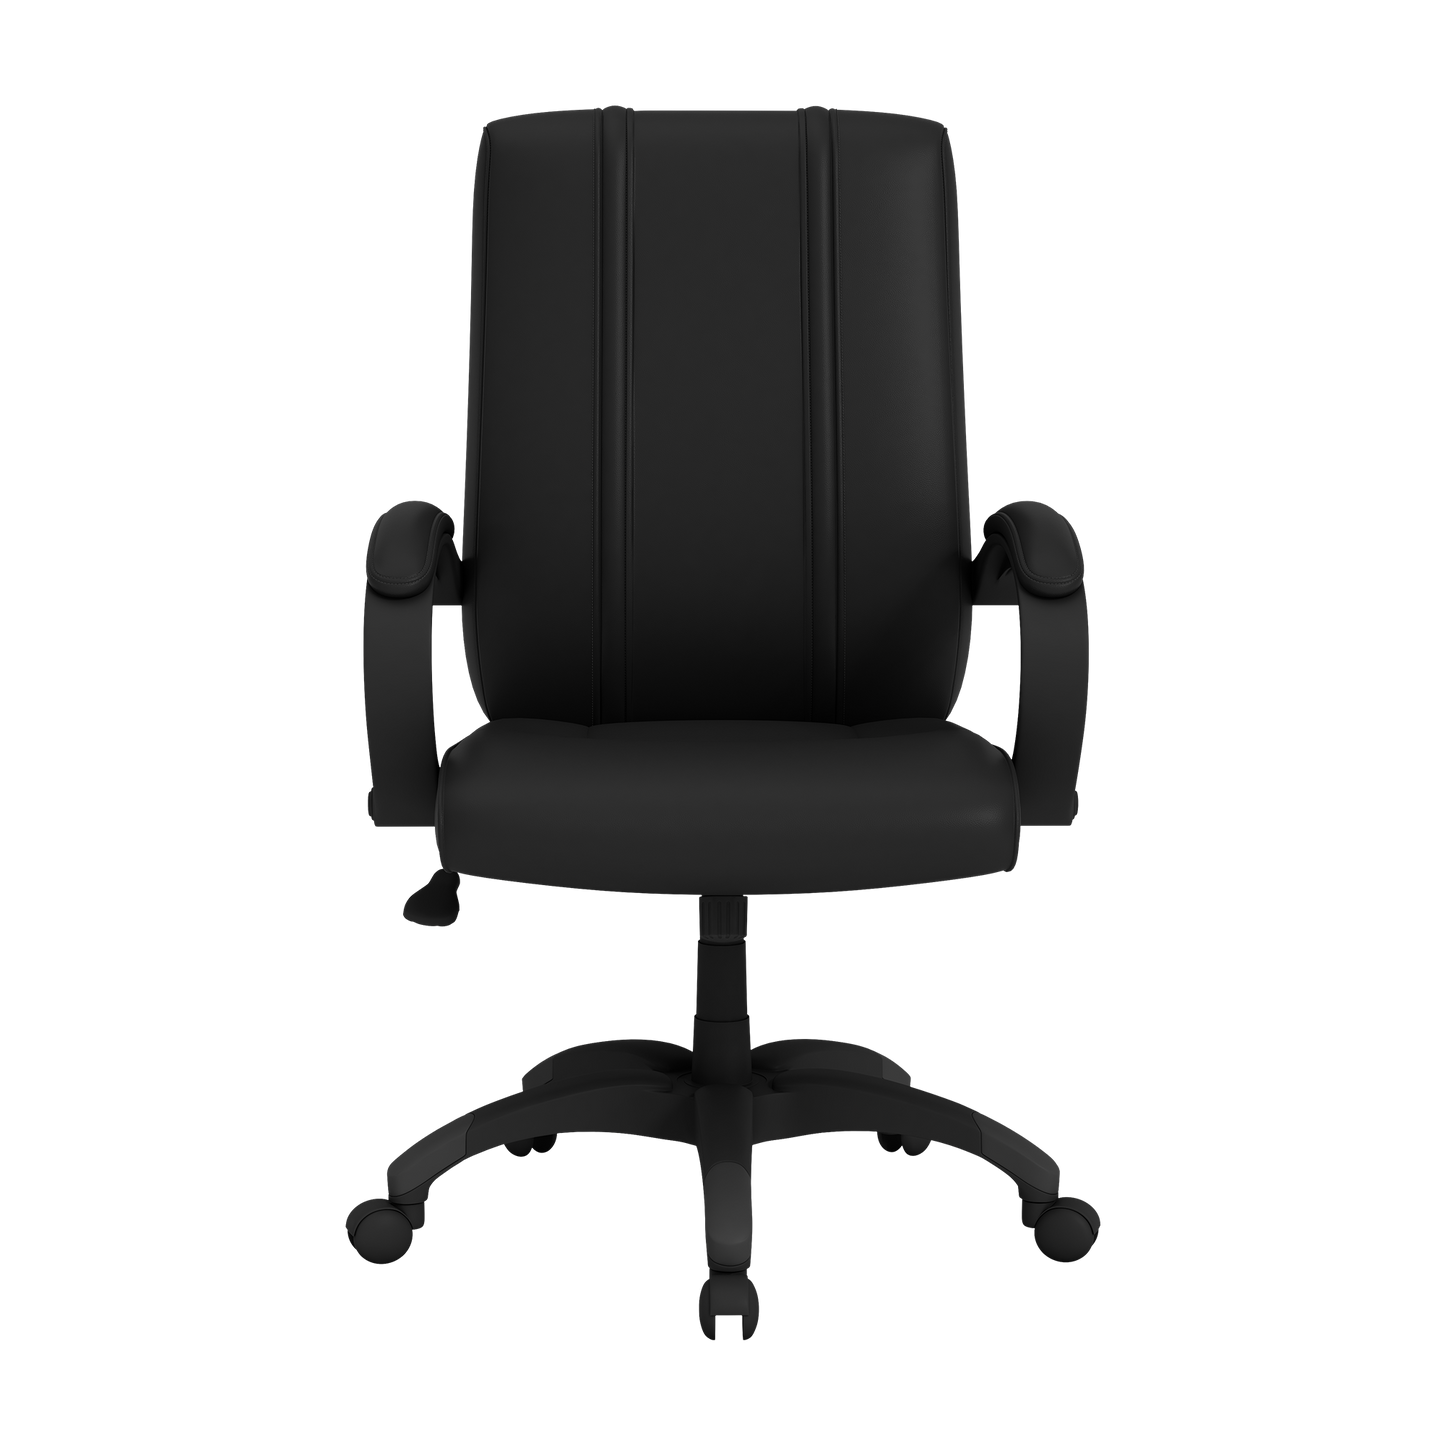 Office Chair 1000 with  Washington Commanders Secondary Logo